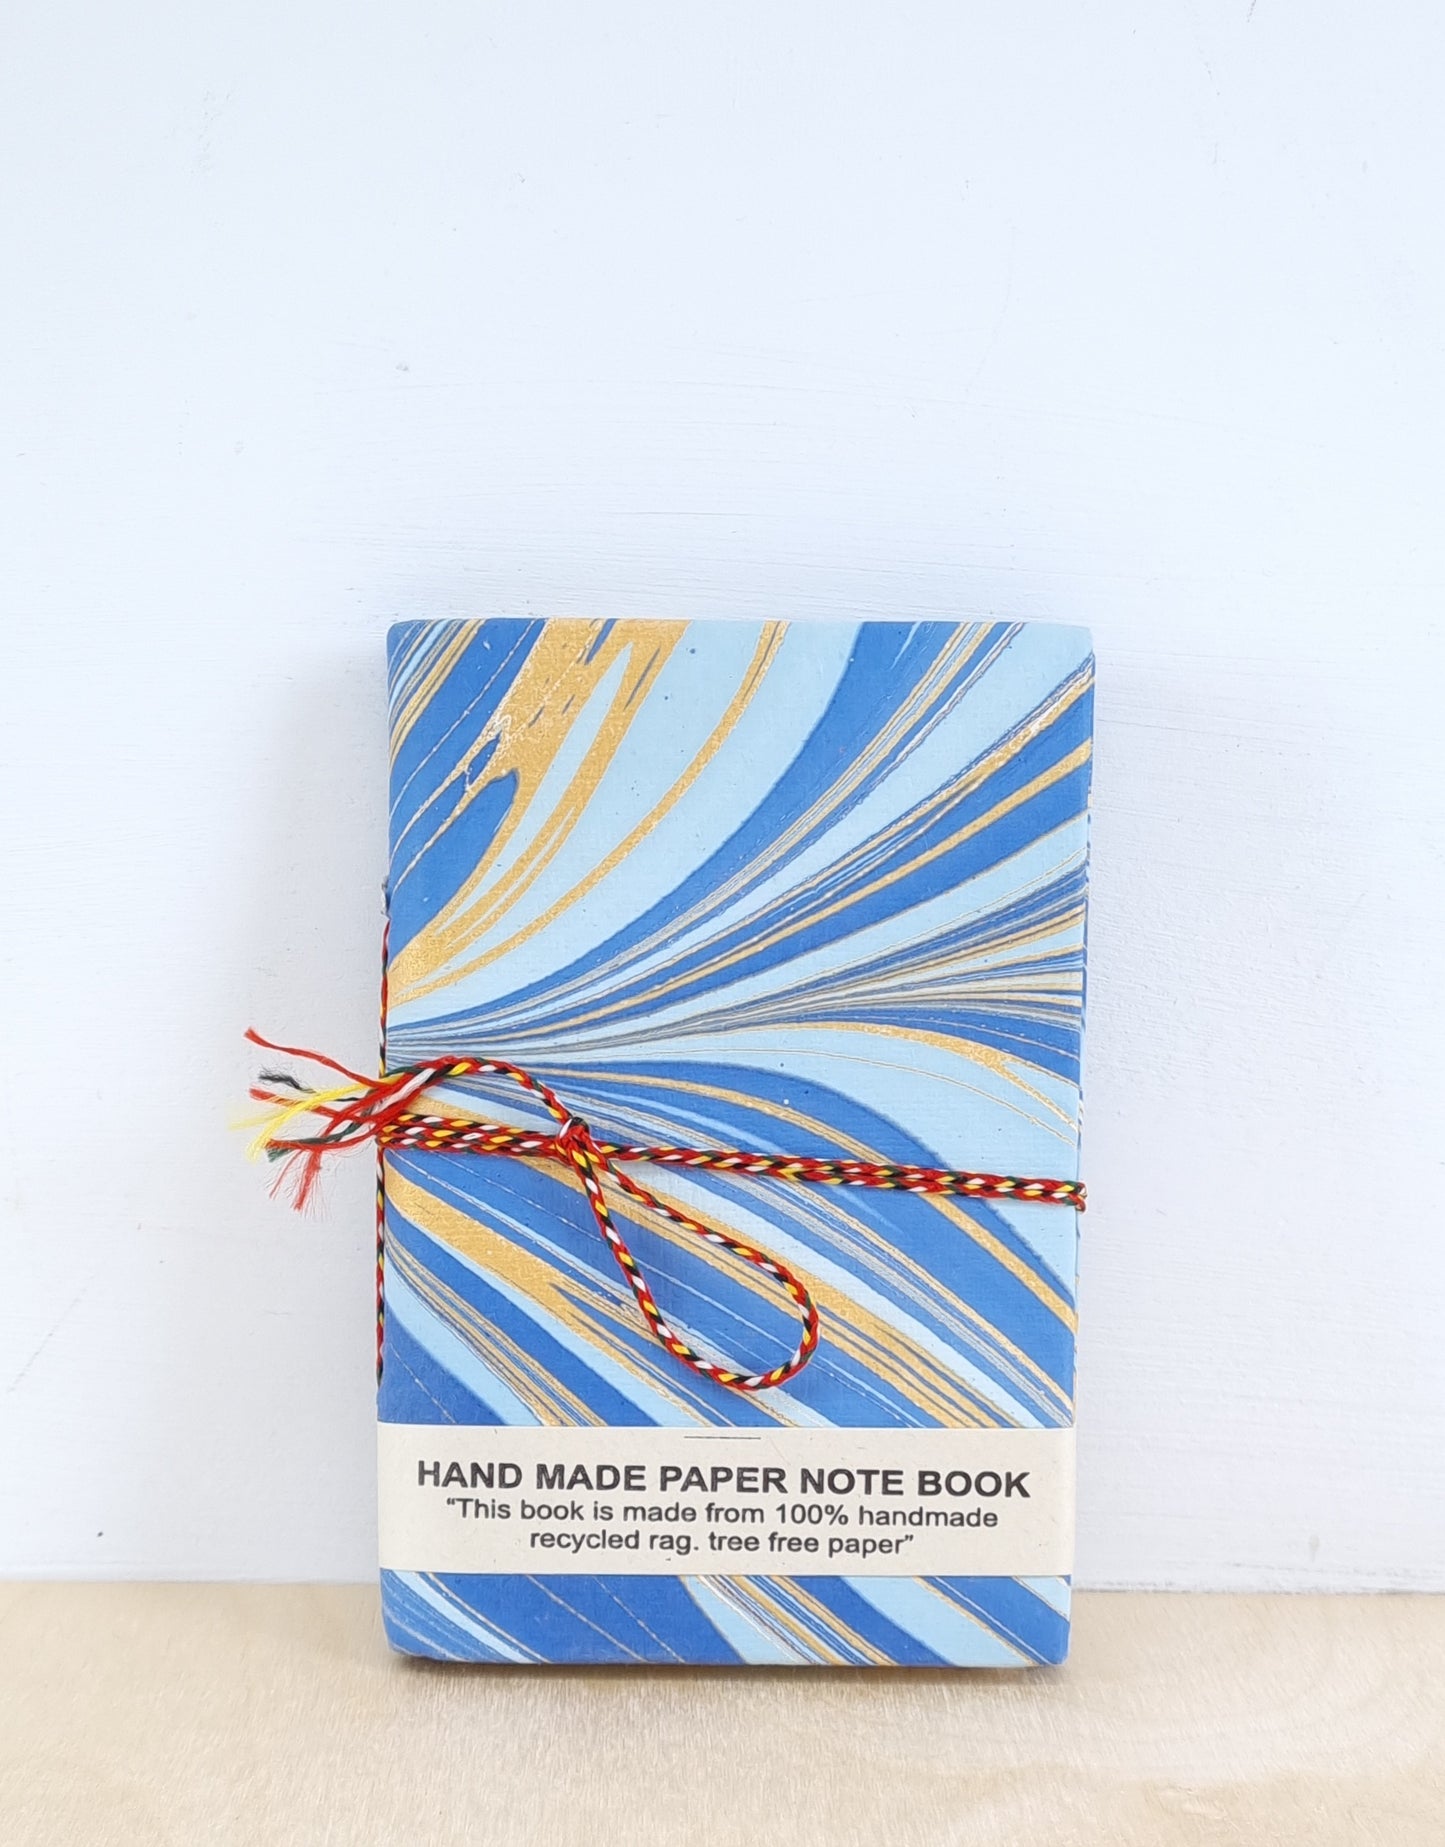 Hand made paper note book